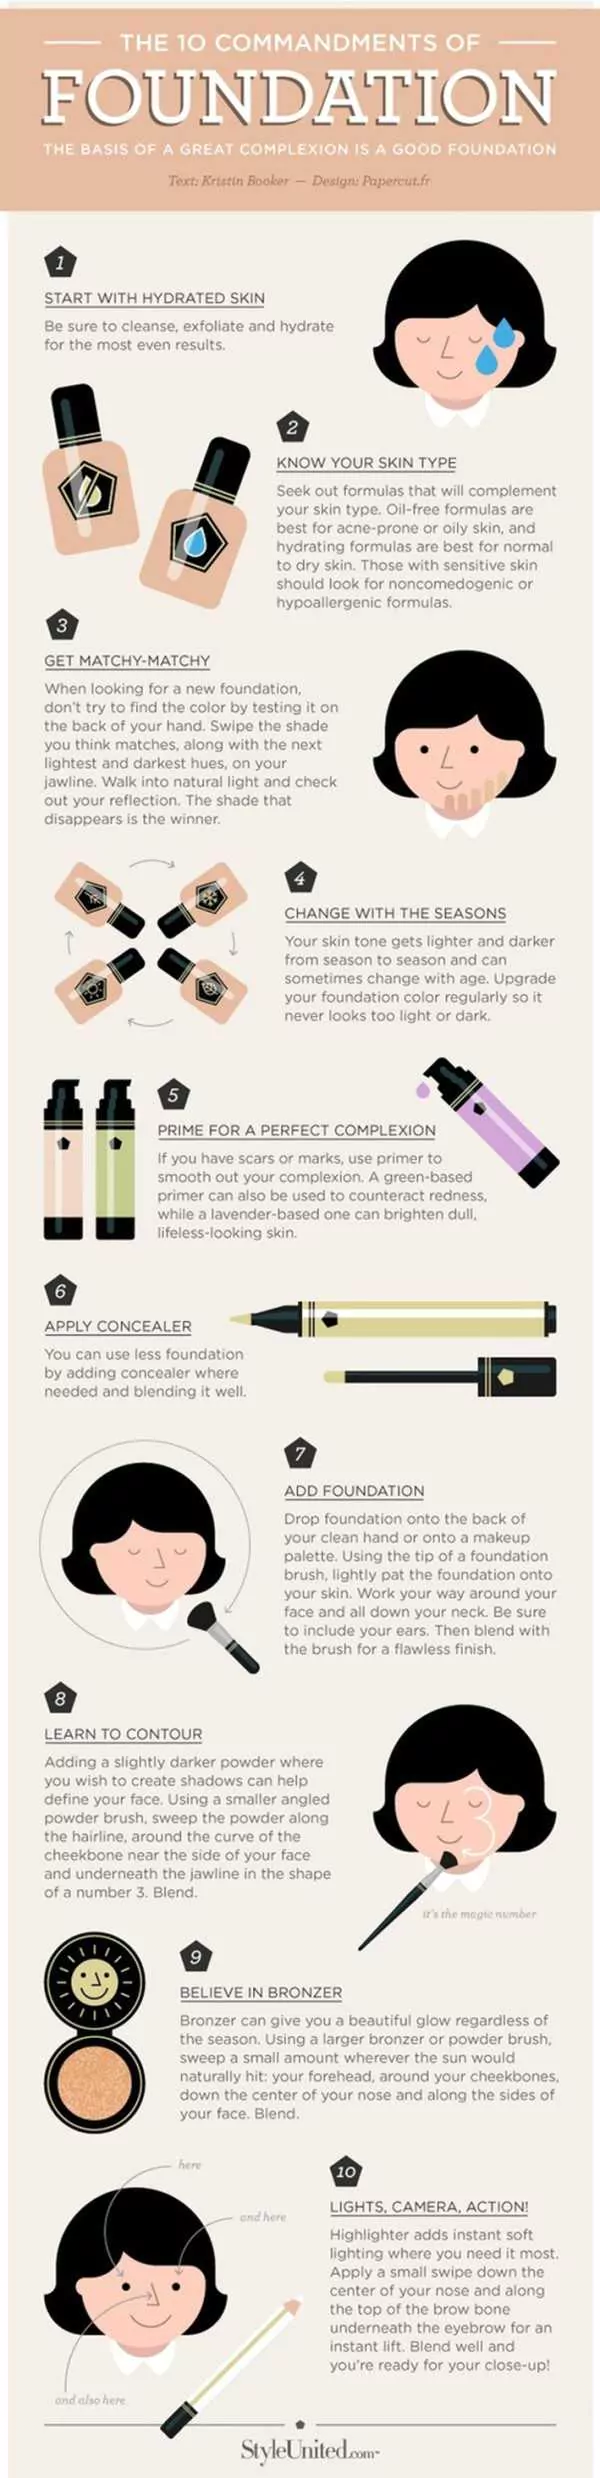 How To Apply Foundation